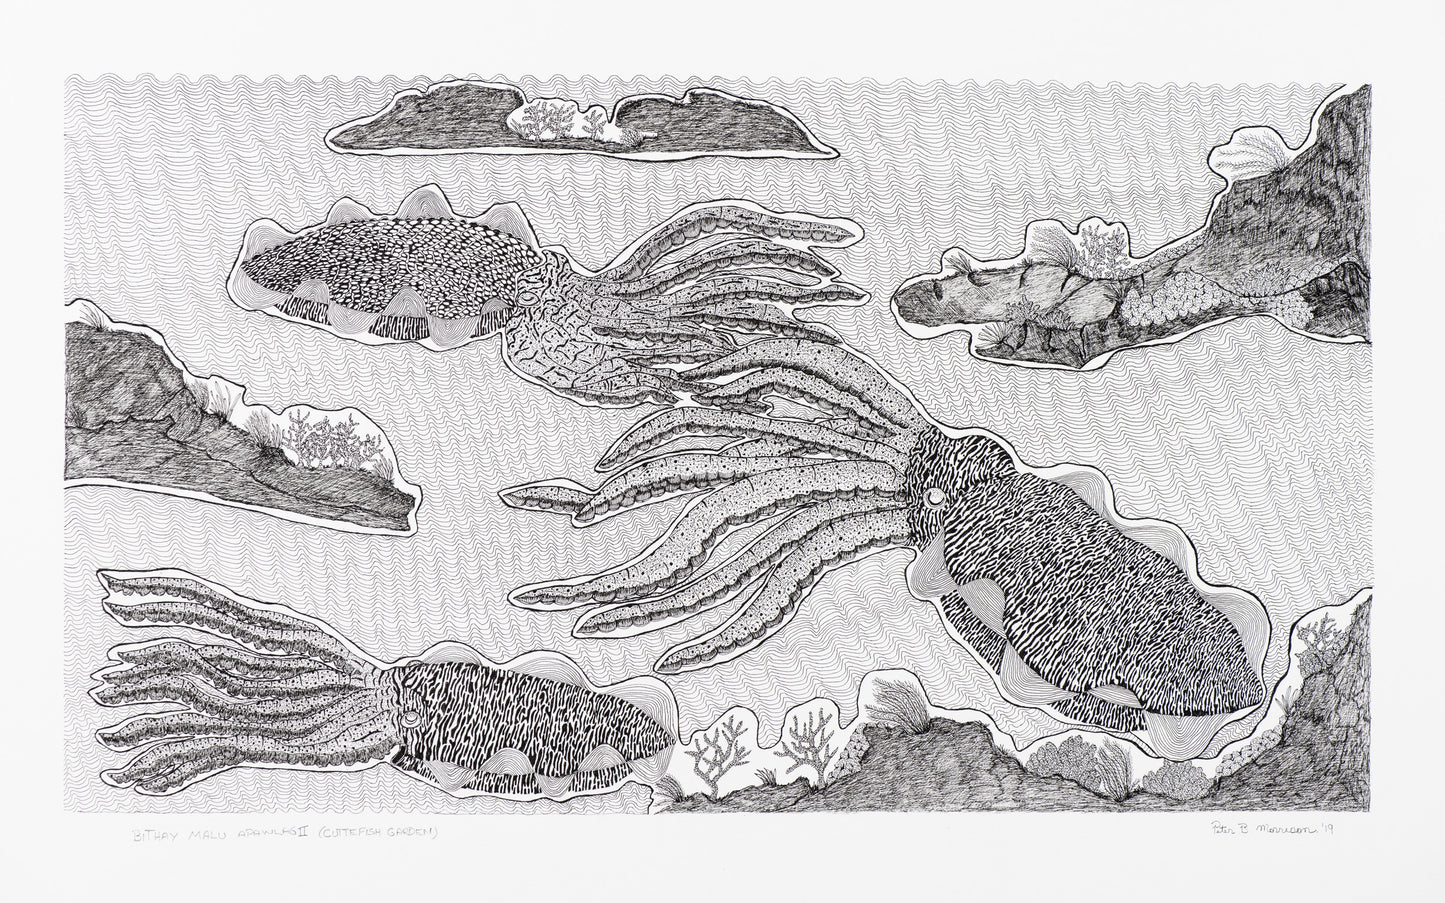 PETER B MORRISON |'Bithay Malu Apawlag II (Cuttlefish Garden)' Drawing | Pen and ink on archival paper